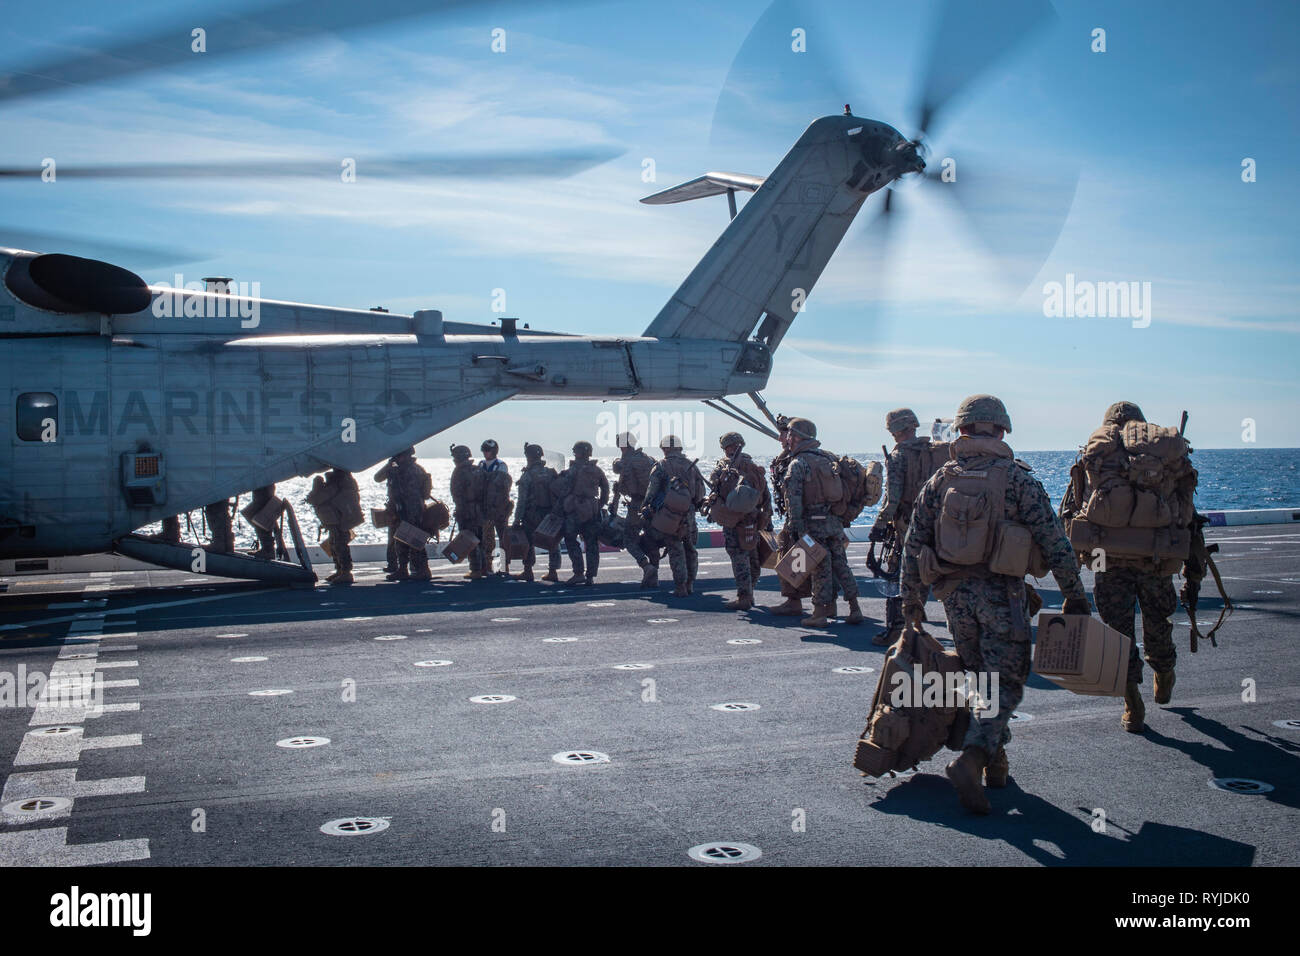 190222-M-ET529-1150 PACIFIC OCEAN (Feb. 22, 2019) U.S. Marines with Kilo Company, Battalion Landing Team 3rd Battalion, 5th Marine Regiment, 11th Marine Expeditionary Unit (MEU), board a CH-53E Super Stallion to depart the San Antonio-class amphibious transport dock ship USS John P. Murtha (LPD 26). The Marines and Sailors of the 11th MEU are conducting routine operations as part of the Boxer Amphibious Ready Group in the eastern Pacific Ocean. (U.S. Marine Corps photo by Lance Cpl. Israel Chincio) Stock Photo